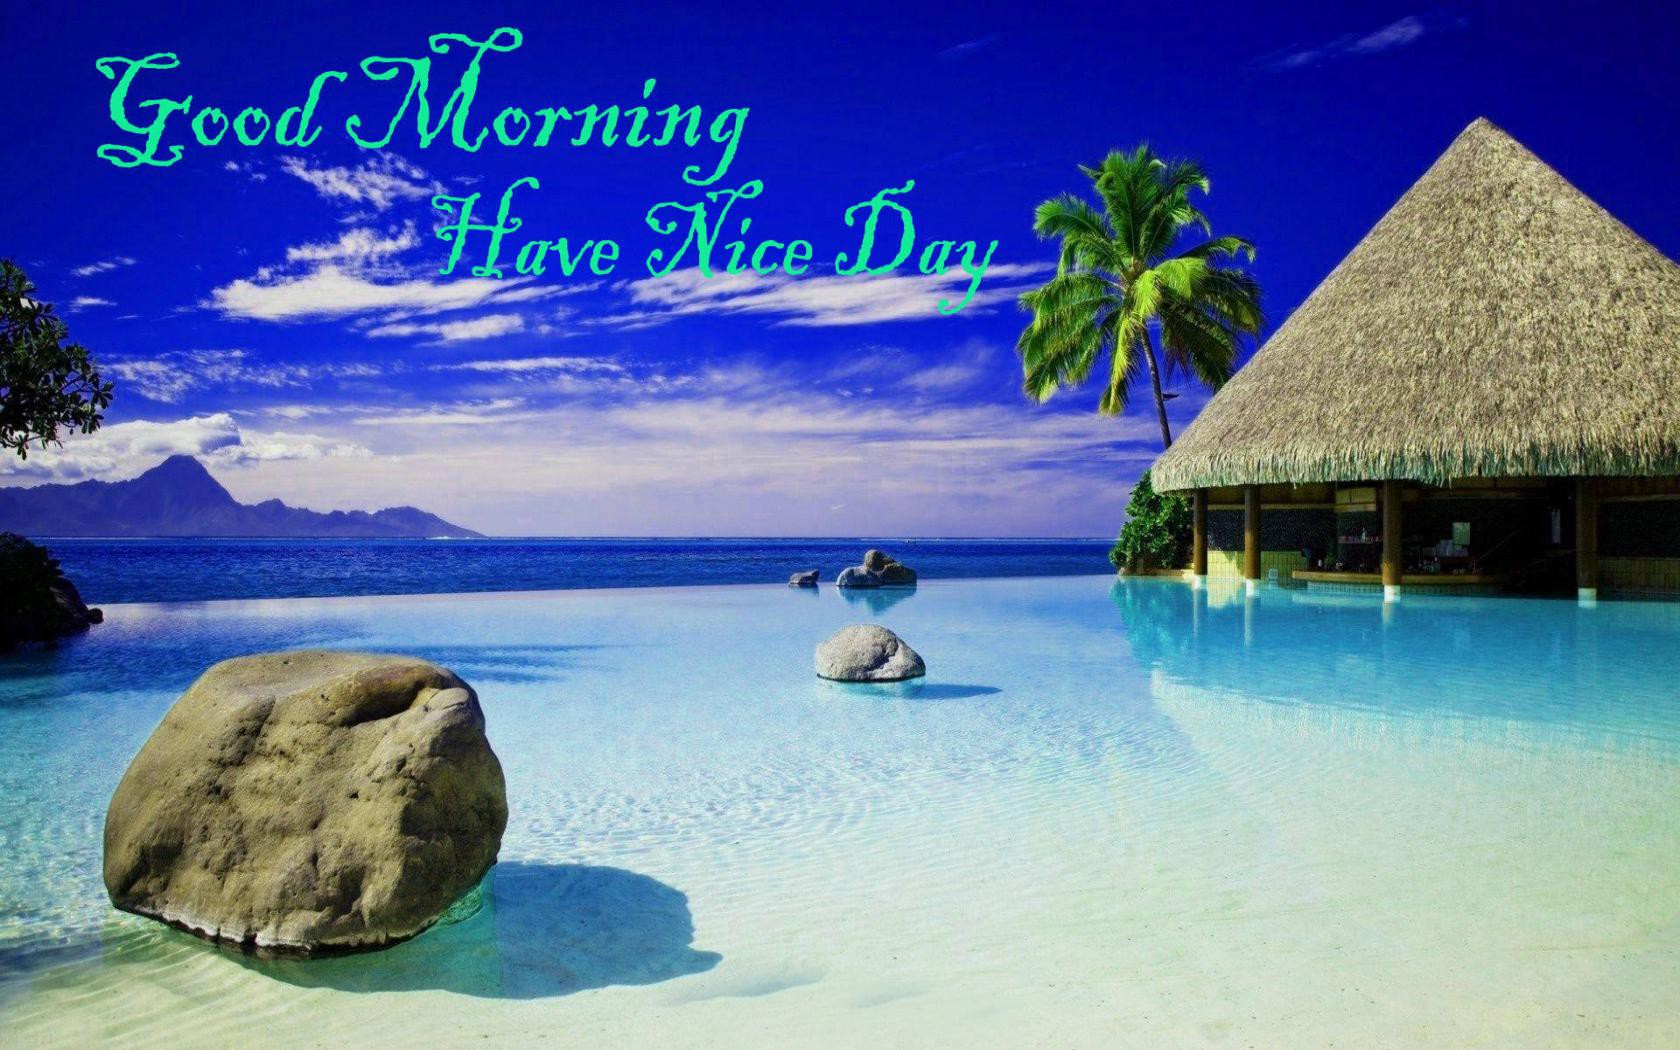 Good Morning Beach Images HD